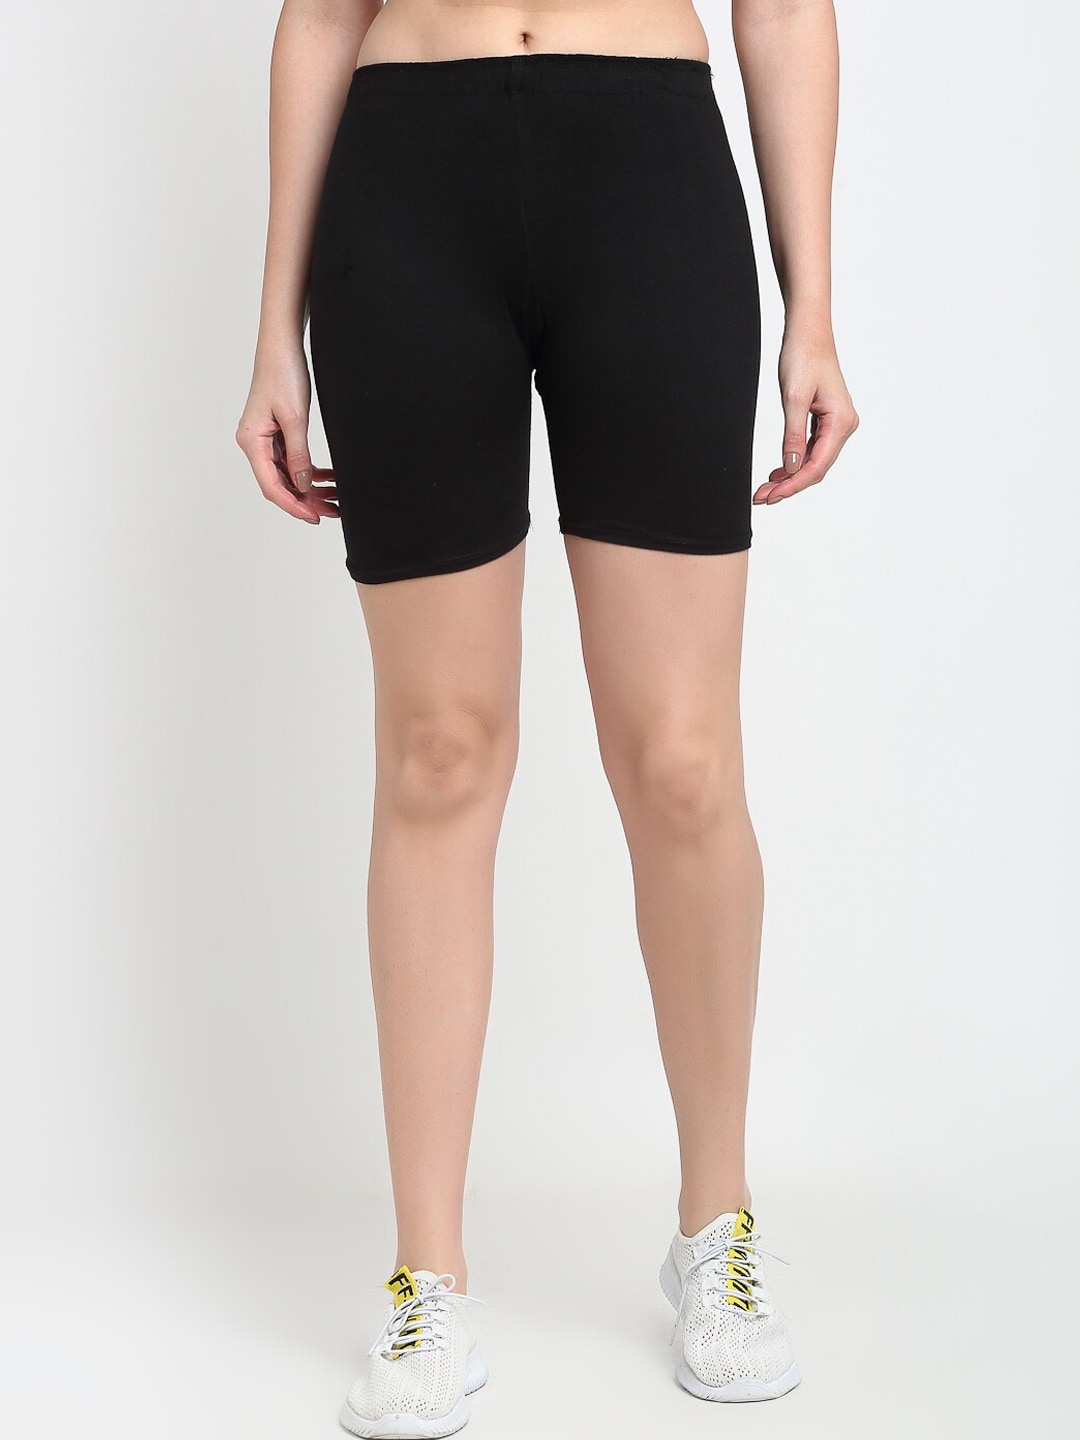 GRACIT Women Black Cycling Sports Shorts Price in India